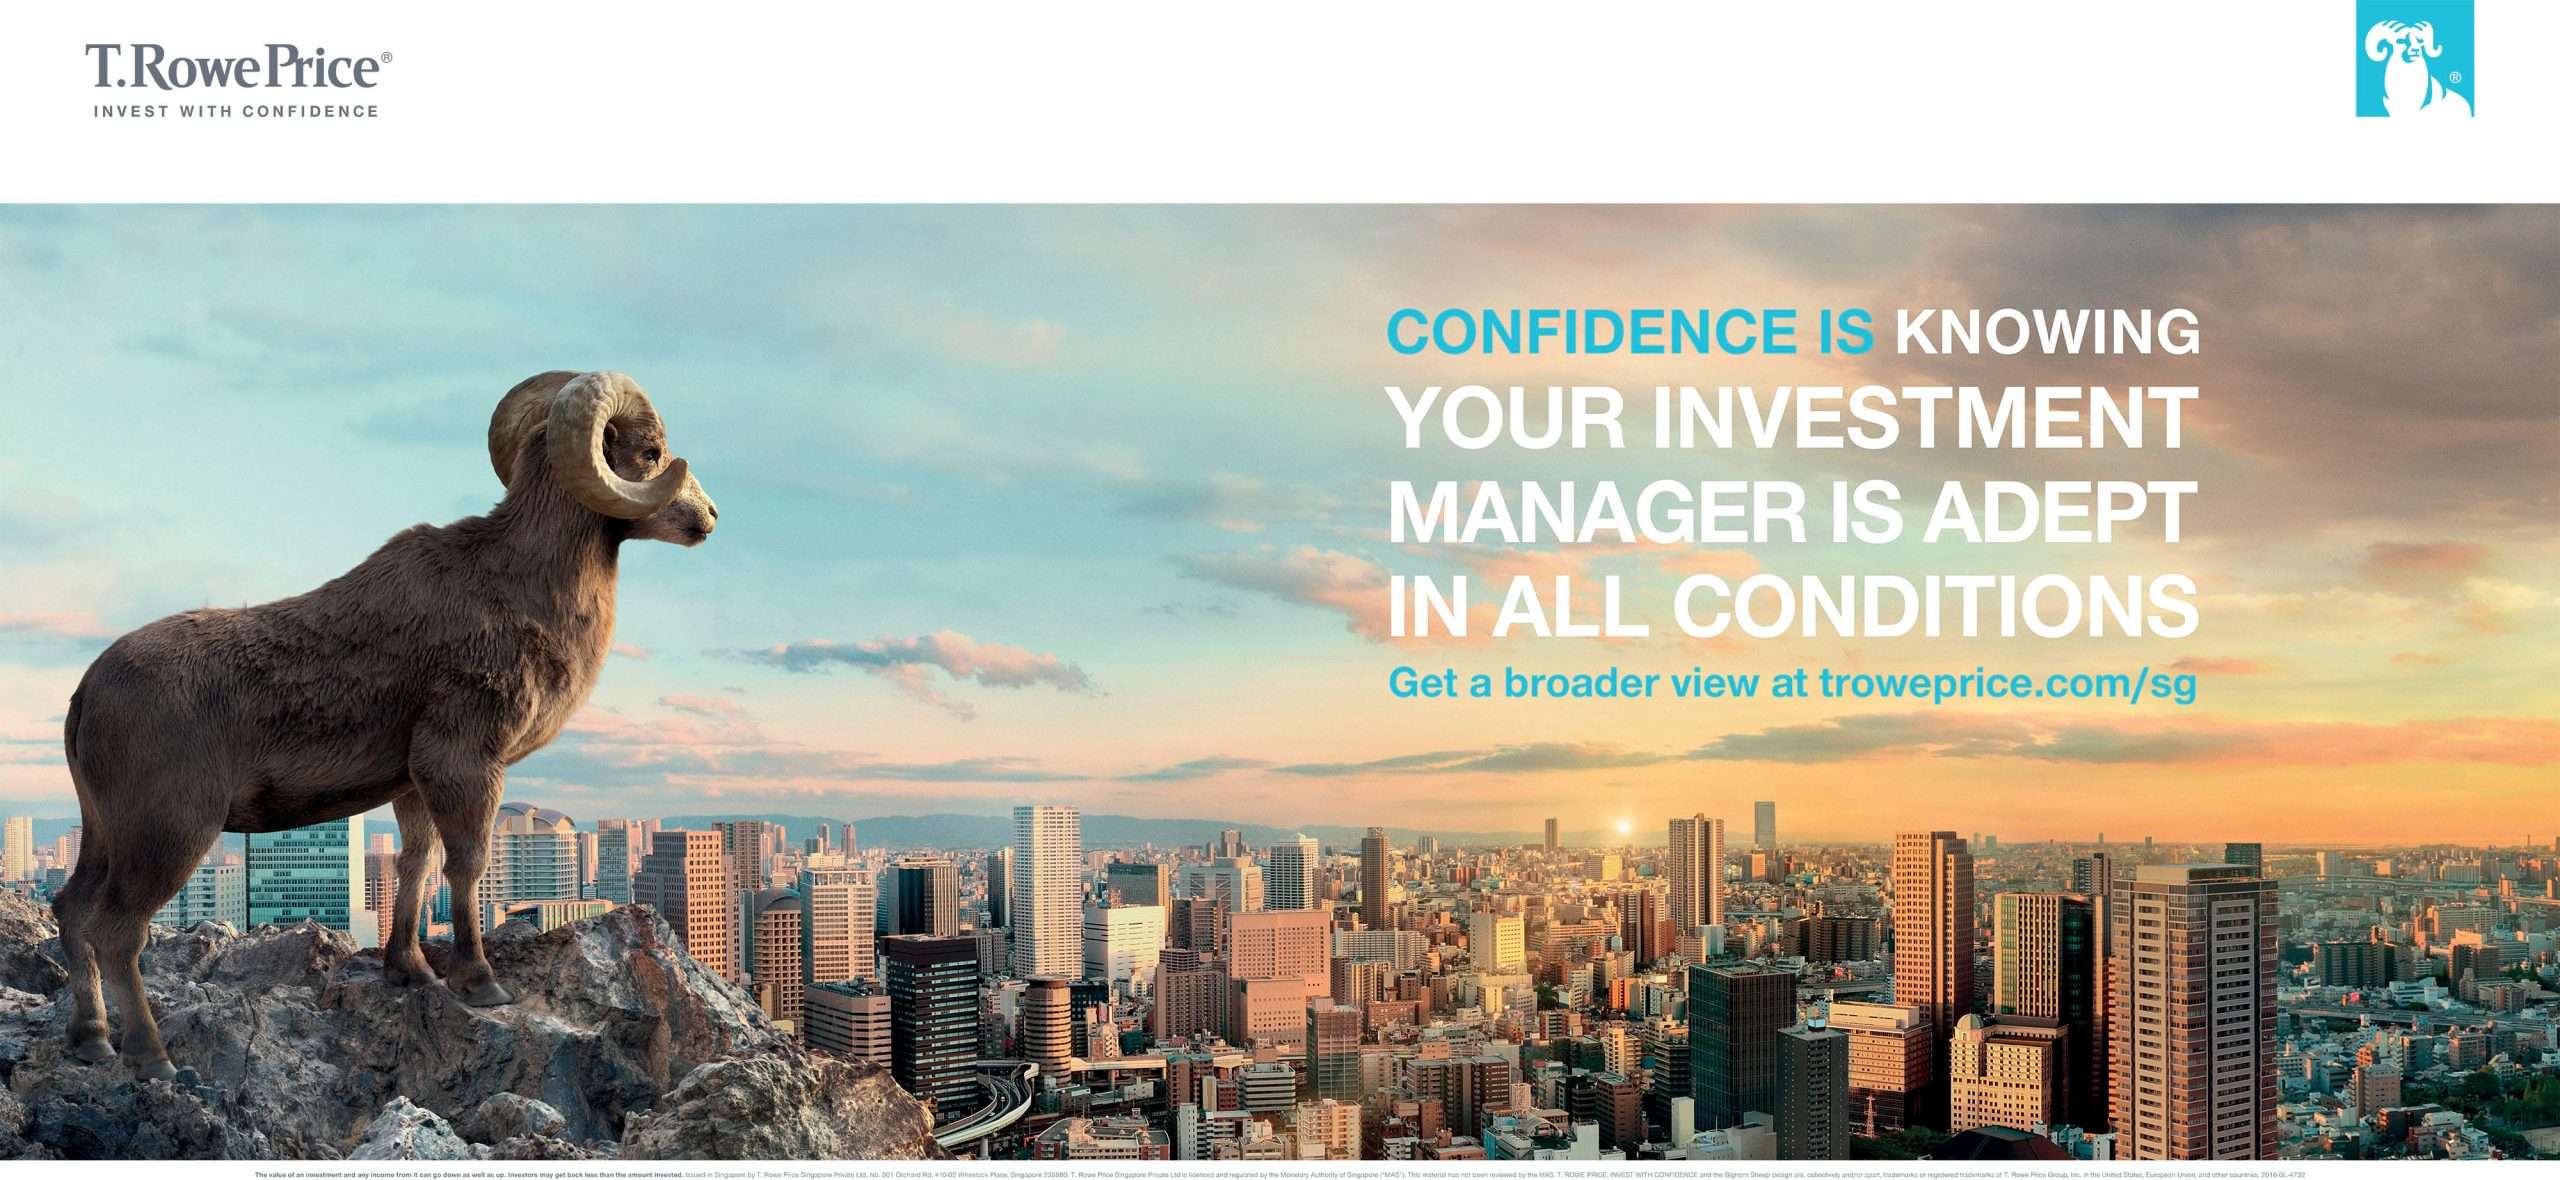 T Rowe Price / Invest With Confidence